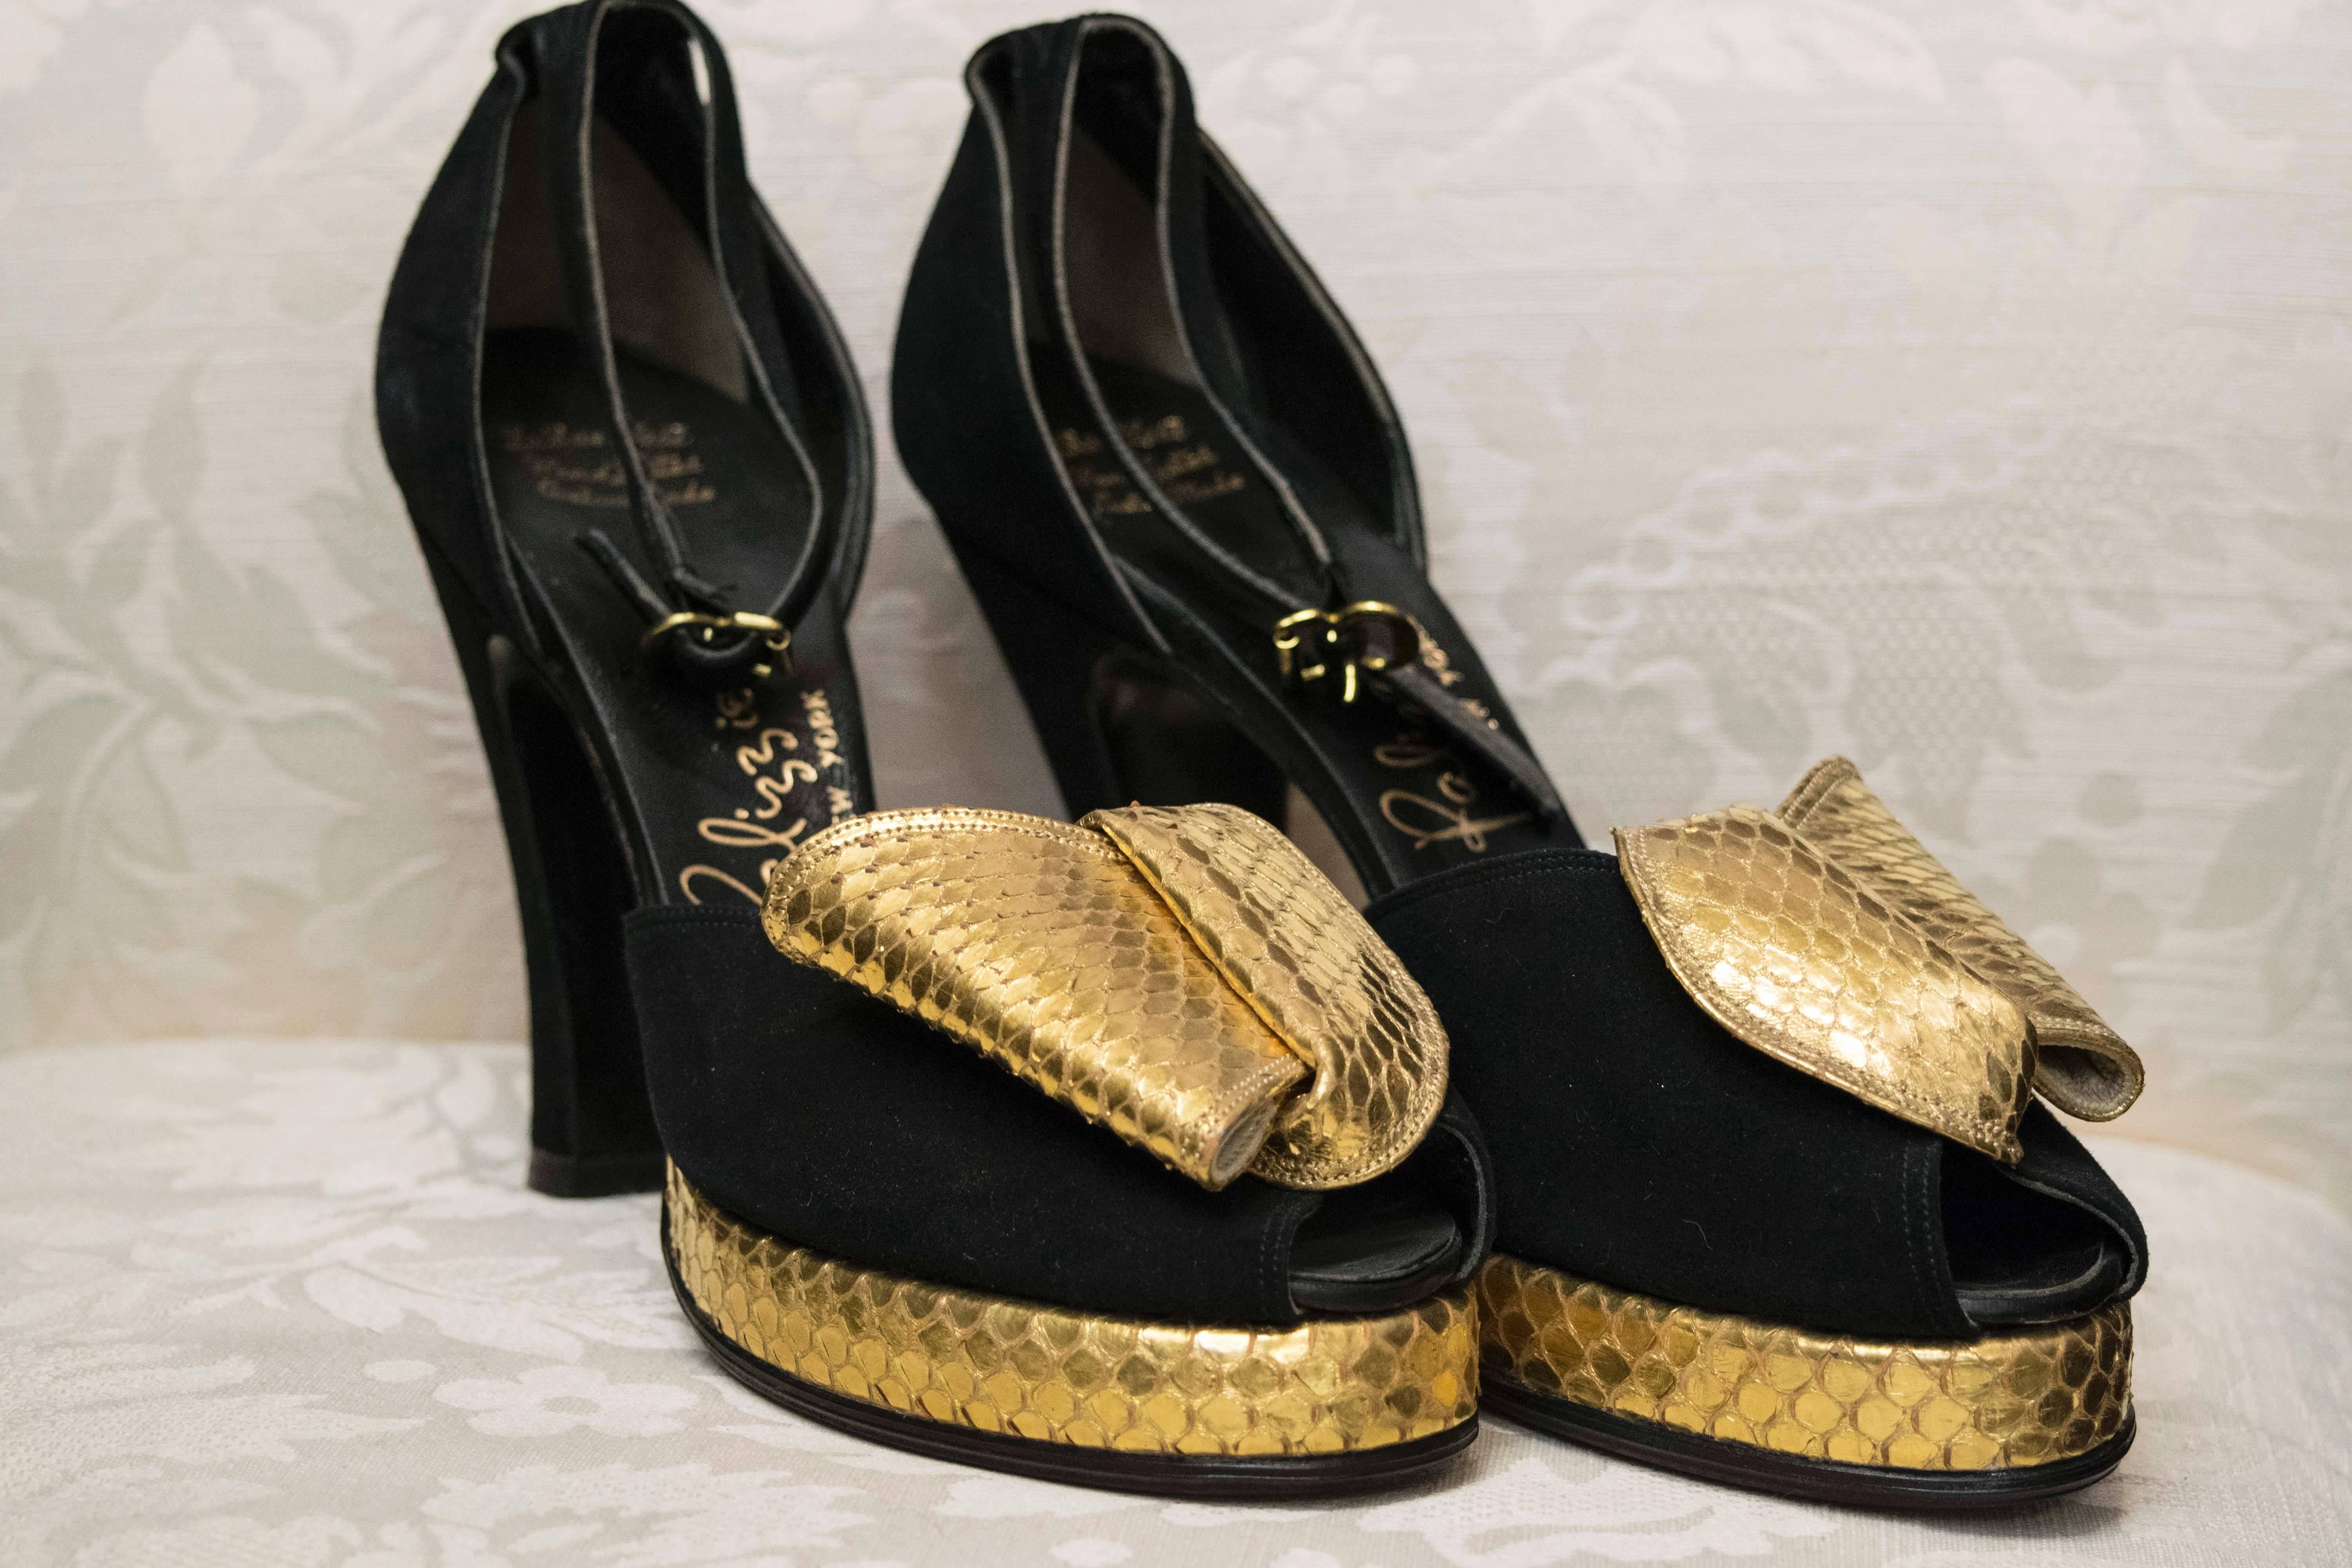 1940s Gold Snakeskin Platform Shoes

Mint condition never worn and absolutly gorgeous '40s platform shoes.  They are suede, with a gold leaf real snakeskin detail on the peep toe. 

Size 6N